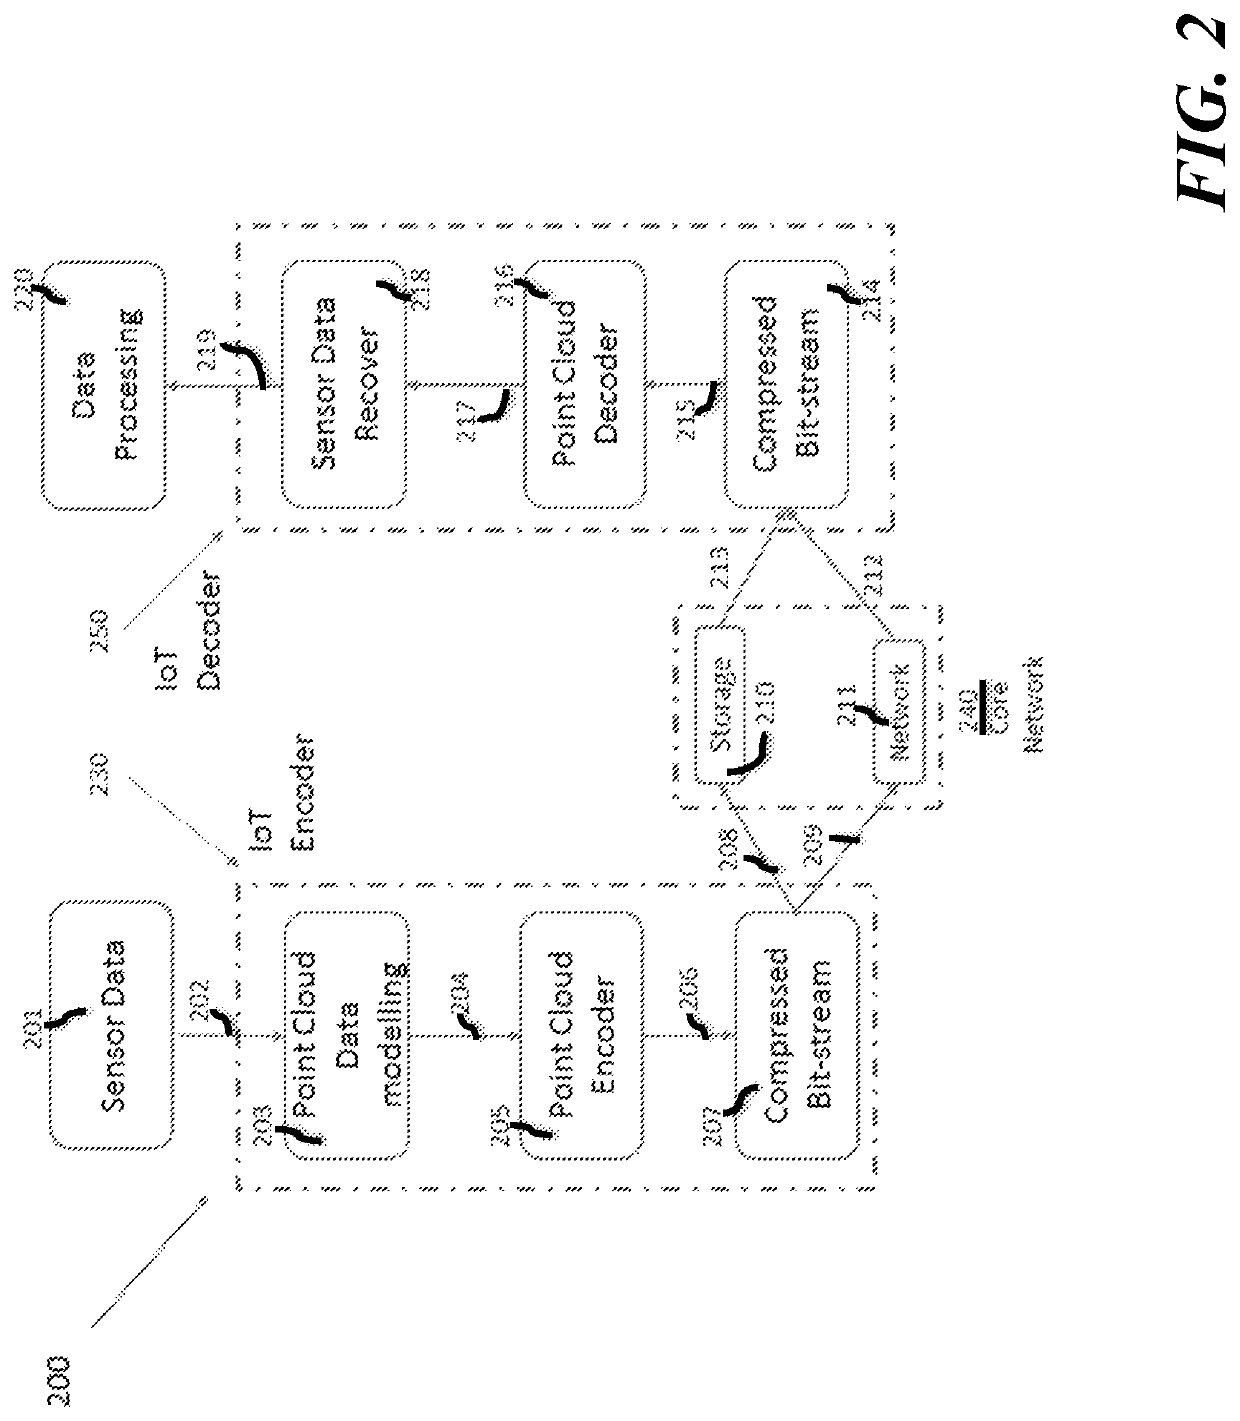 System and method for aggregation, archiving and compression of internet of things wireless sensor data